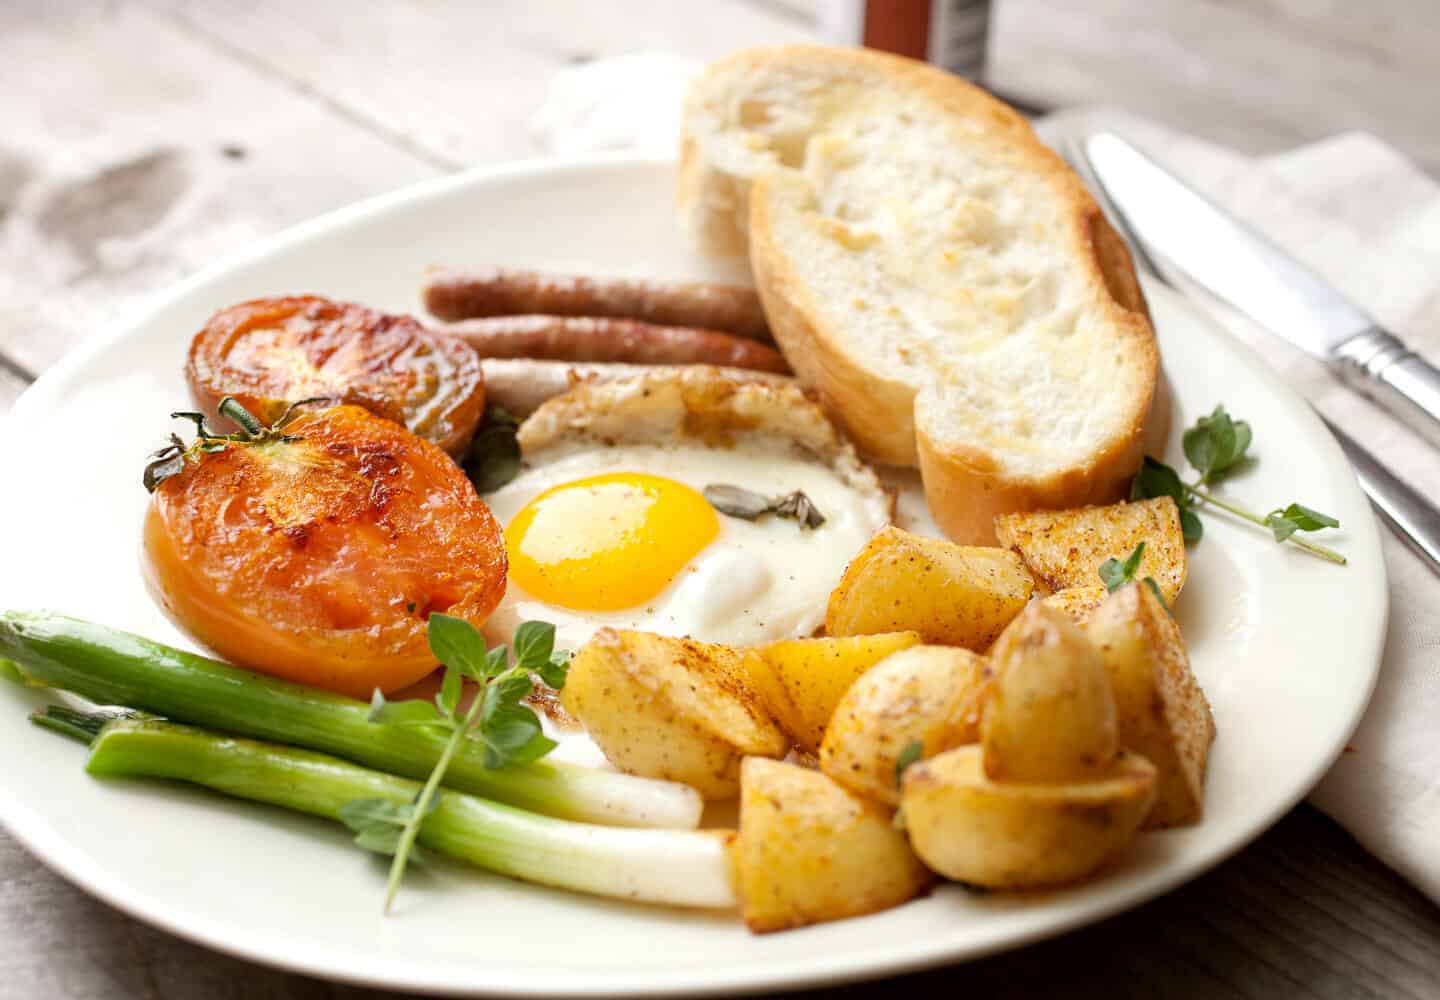 Quick Tomato Fry Up: This is the season when tomatoes are at their best. Make this quick tomato fry up based on the English full breakfast minus a few things and plus a few others! Great way to start the day! | macheesmo.com